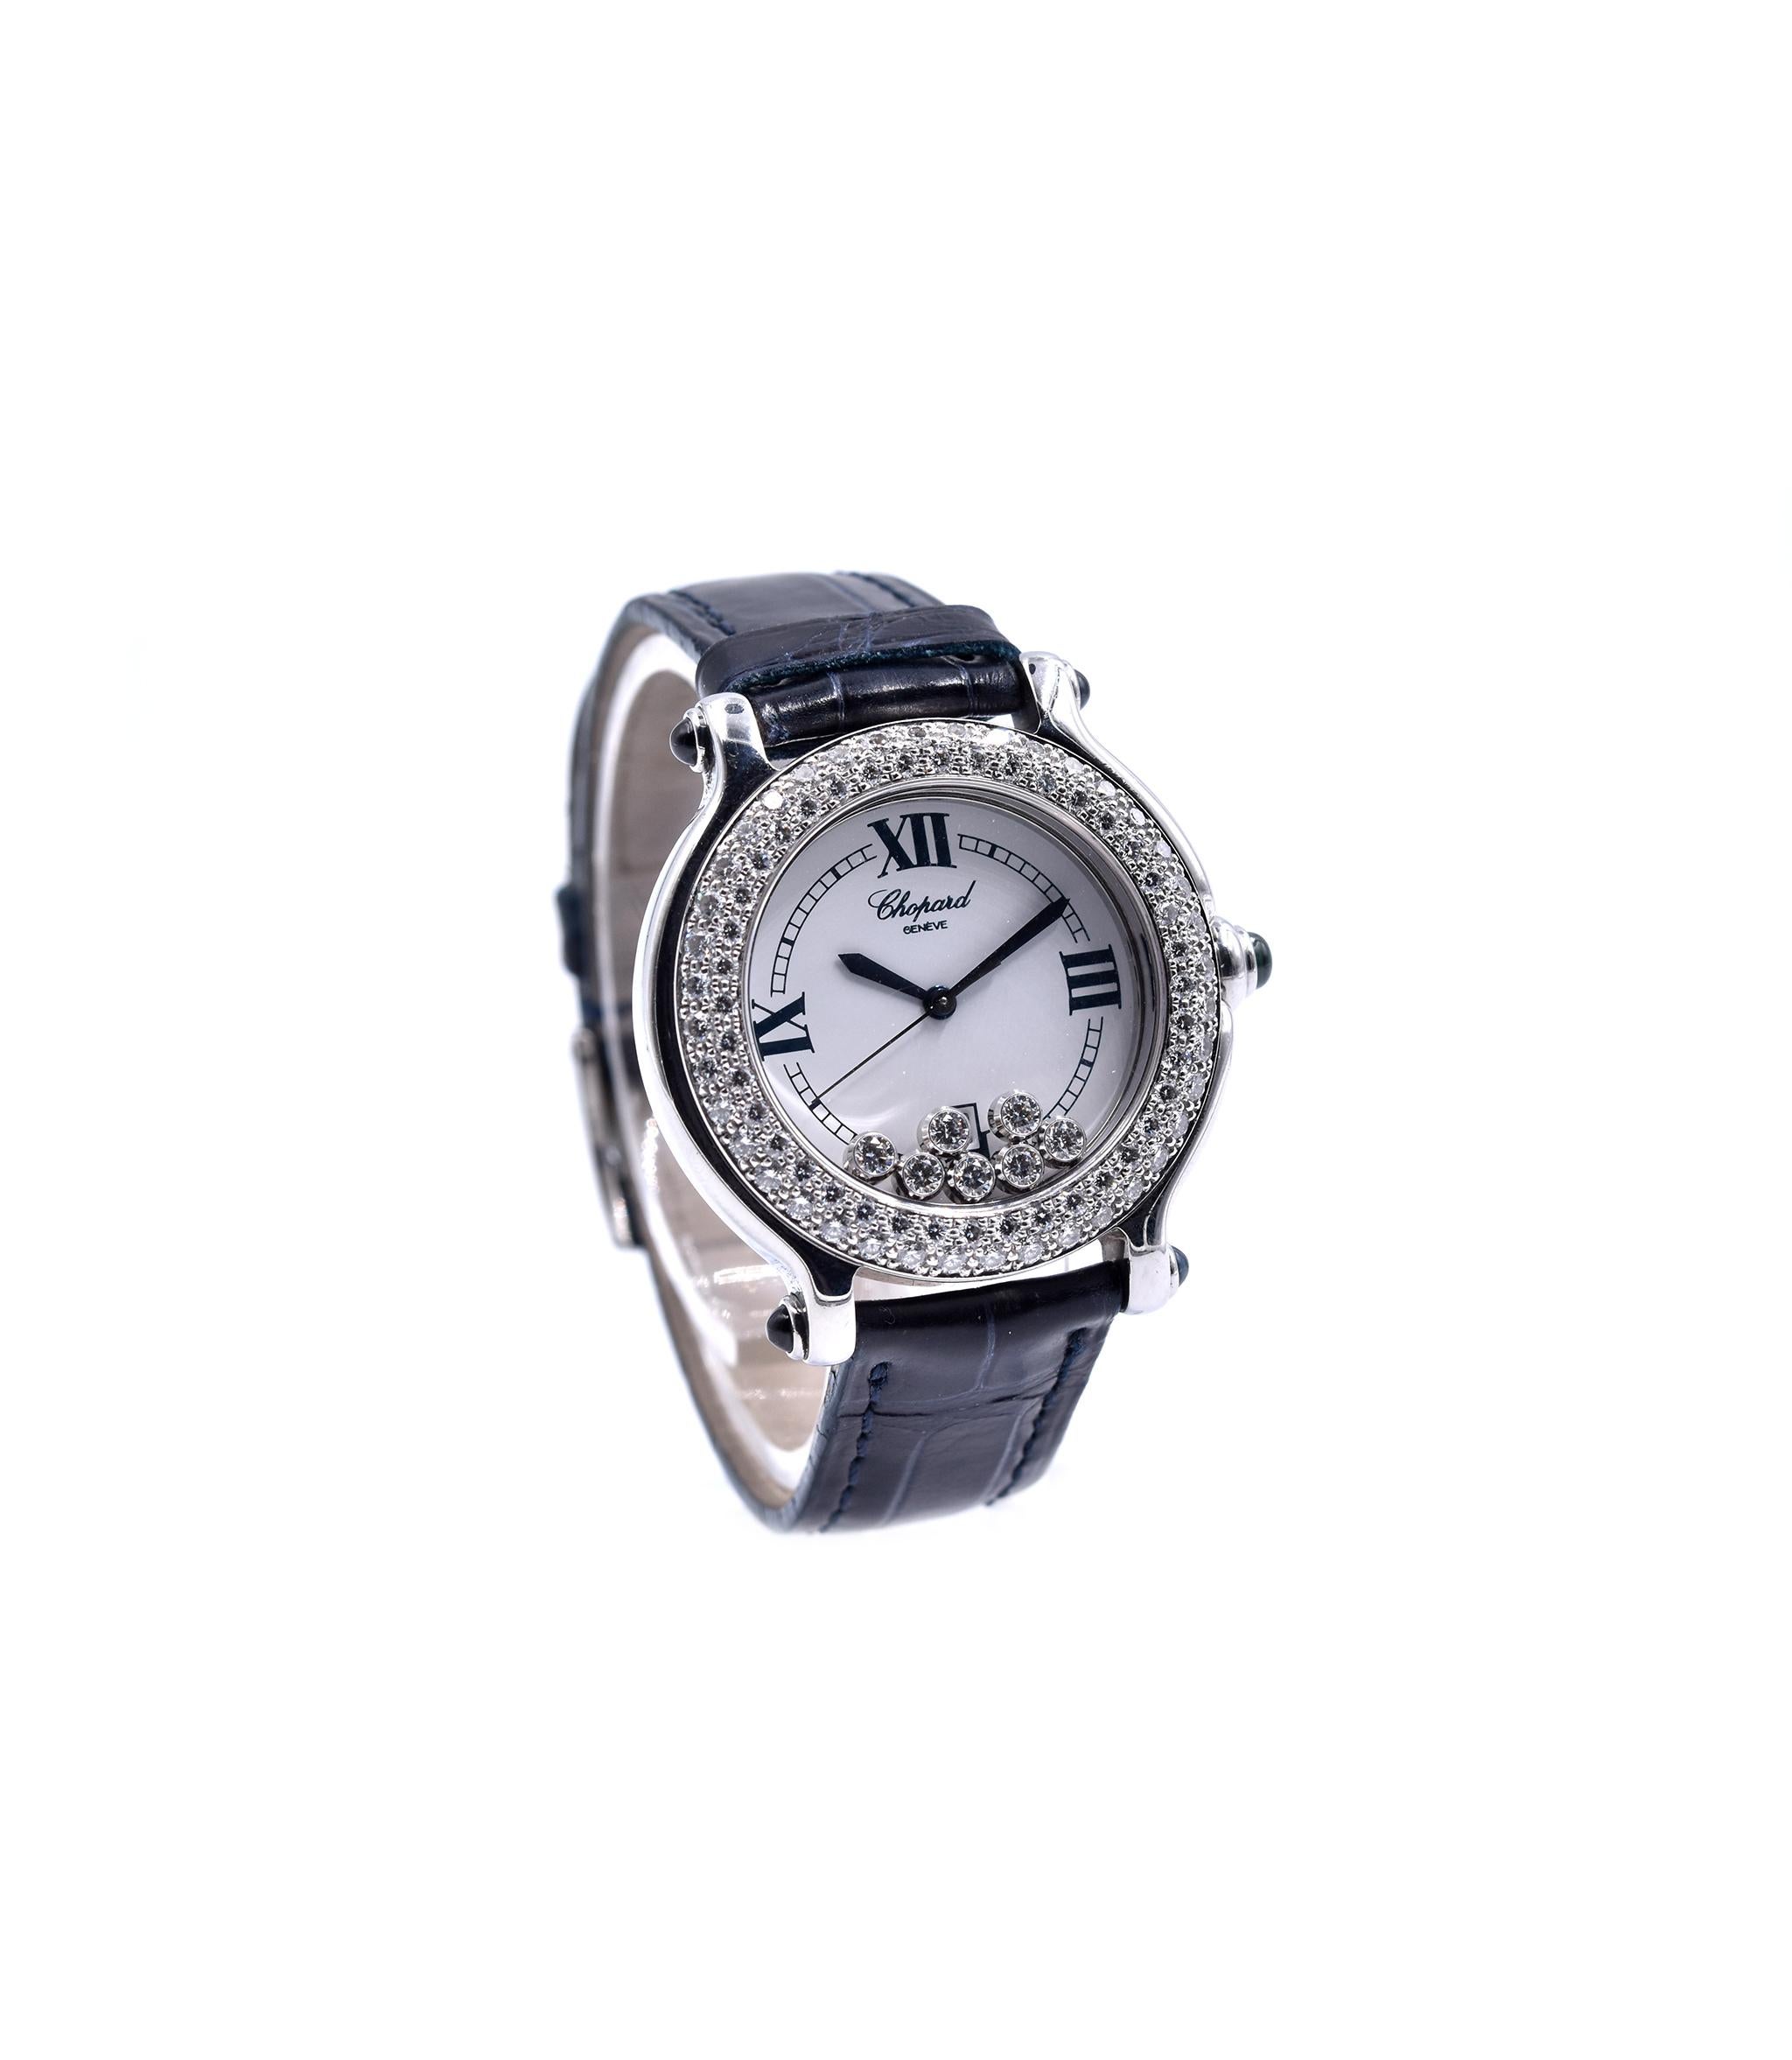 Movement: quartz
Function: hours, minutes, seconds, date
Case: 36mm case, push/pull crown, sapphire crystal
Band: Chopard black leather strap with buckle 
Dial: white roman and stick dial, luminescence hands
Reference #: 8236
Serial: 1067XXX

No box